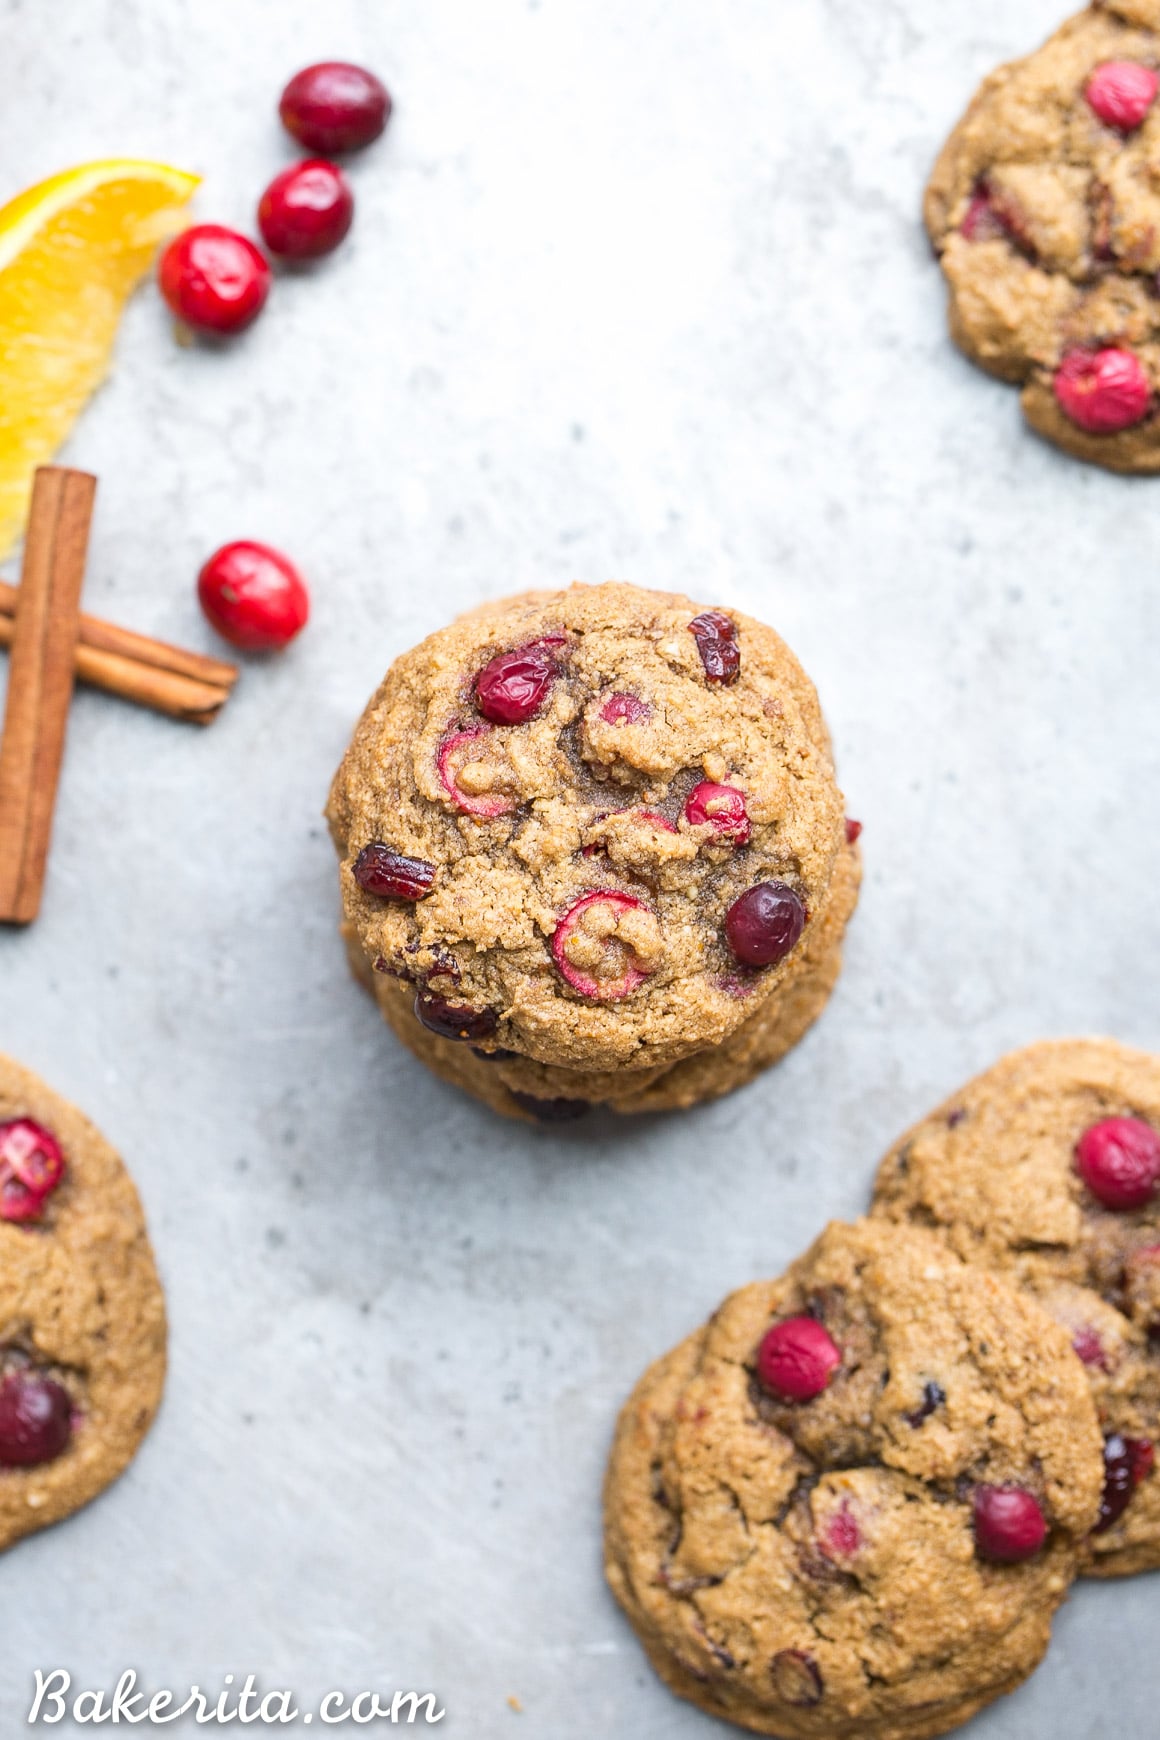 These Gluten-Free Cranberry Orange Cookies are soft, chewy and bursting with flavor! They're loaded with cinnamon, orange zest, fresh tart cranberries, and chewy dried cranberries. Perfect for the holidays!